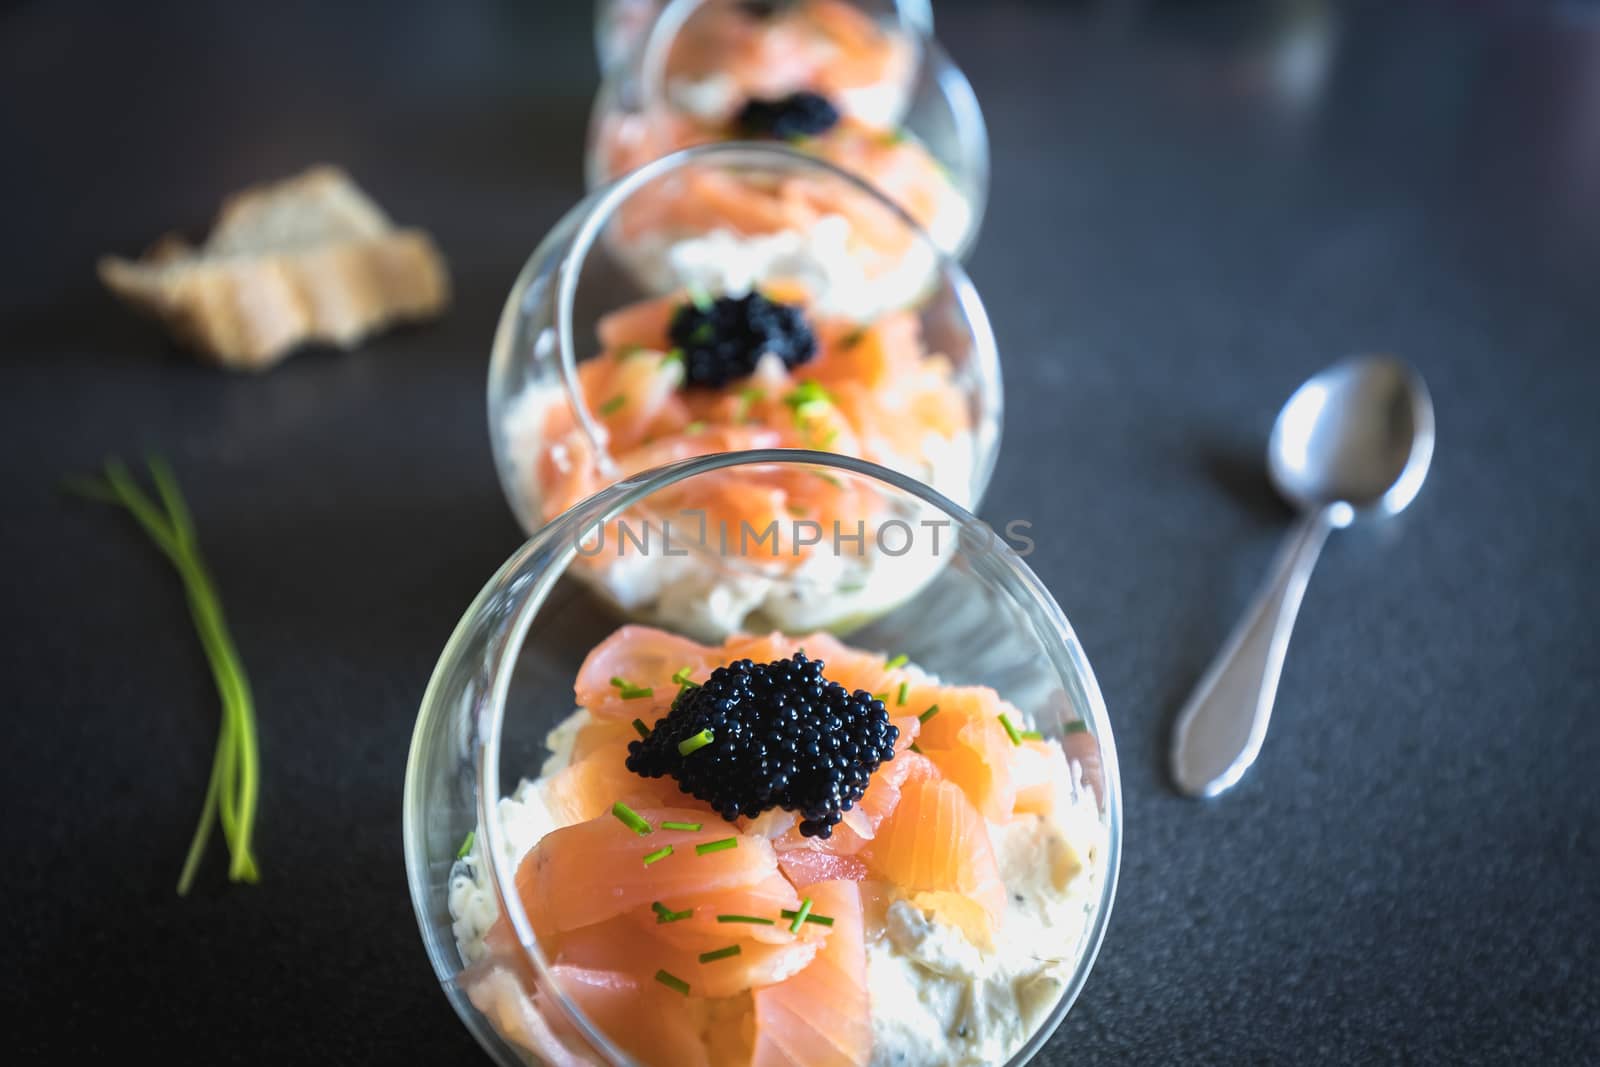 verrine salmon lumpfish egg fresh cheese and avocado bed in the kitchen